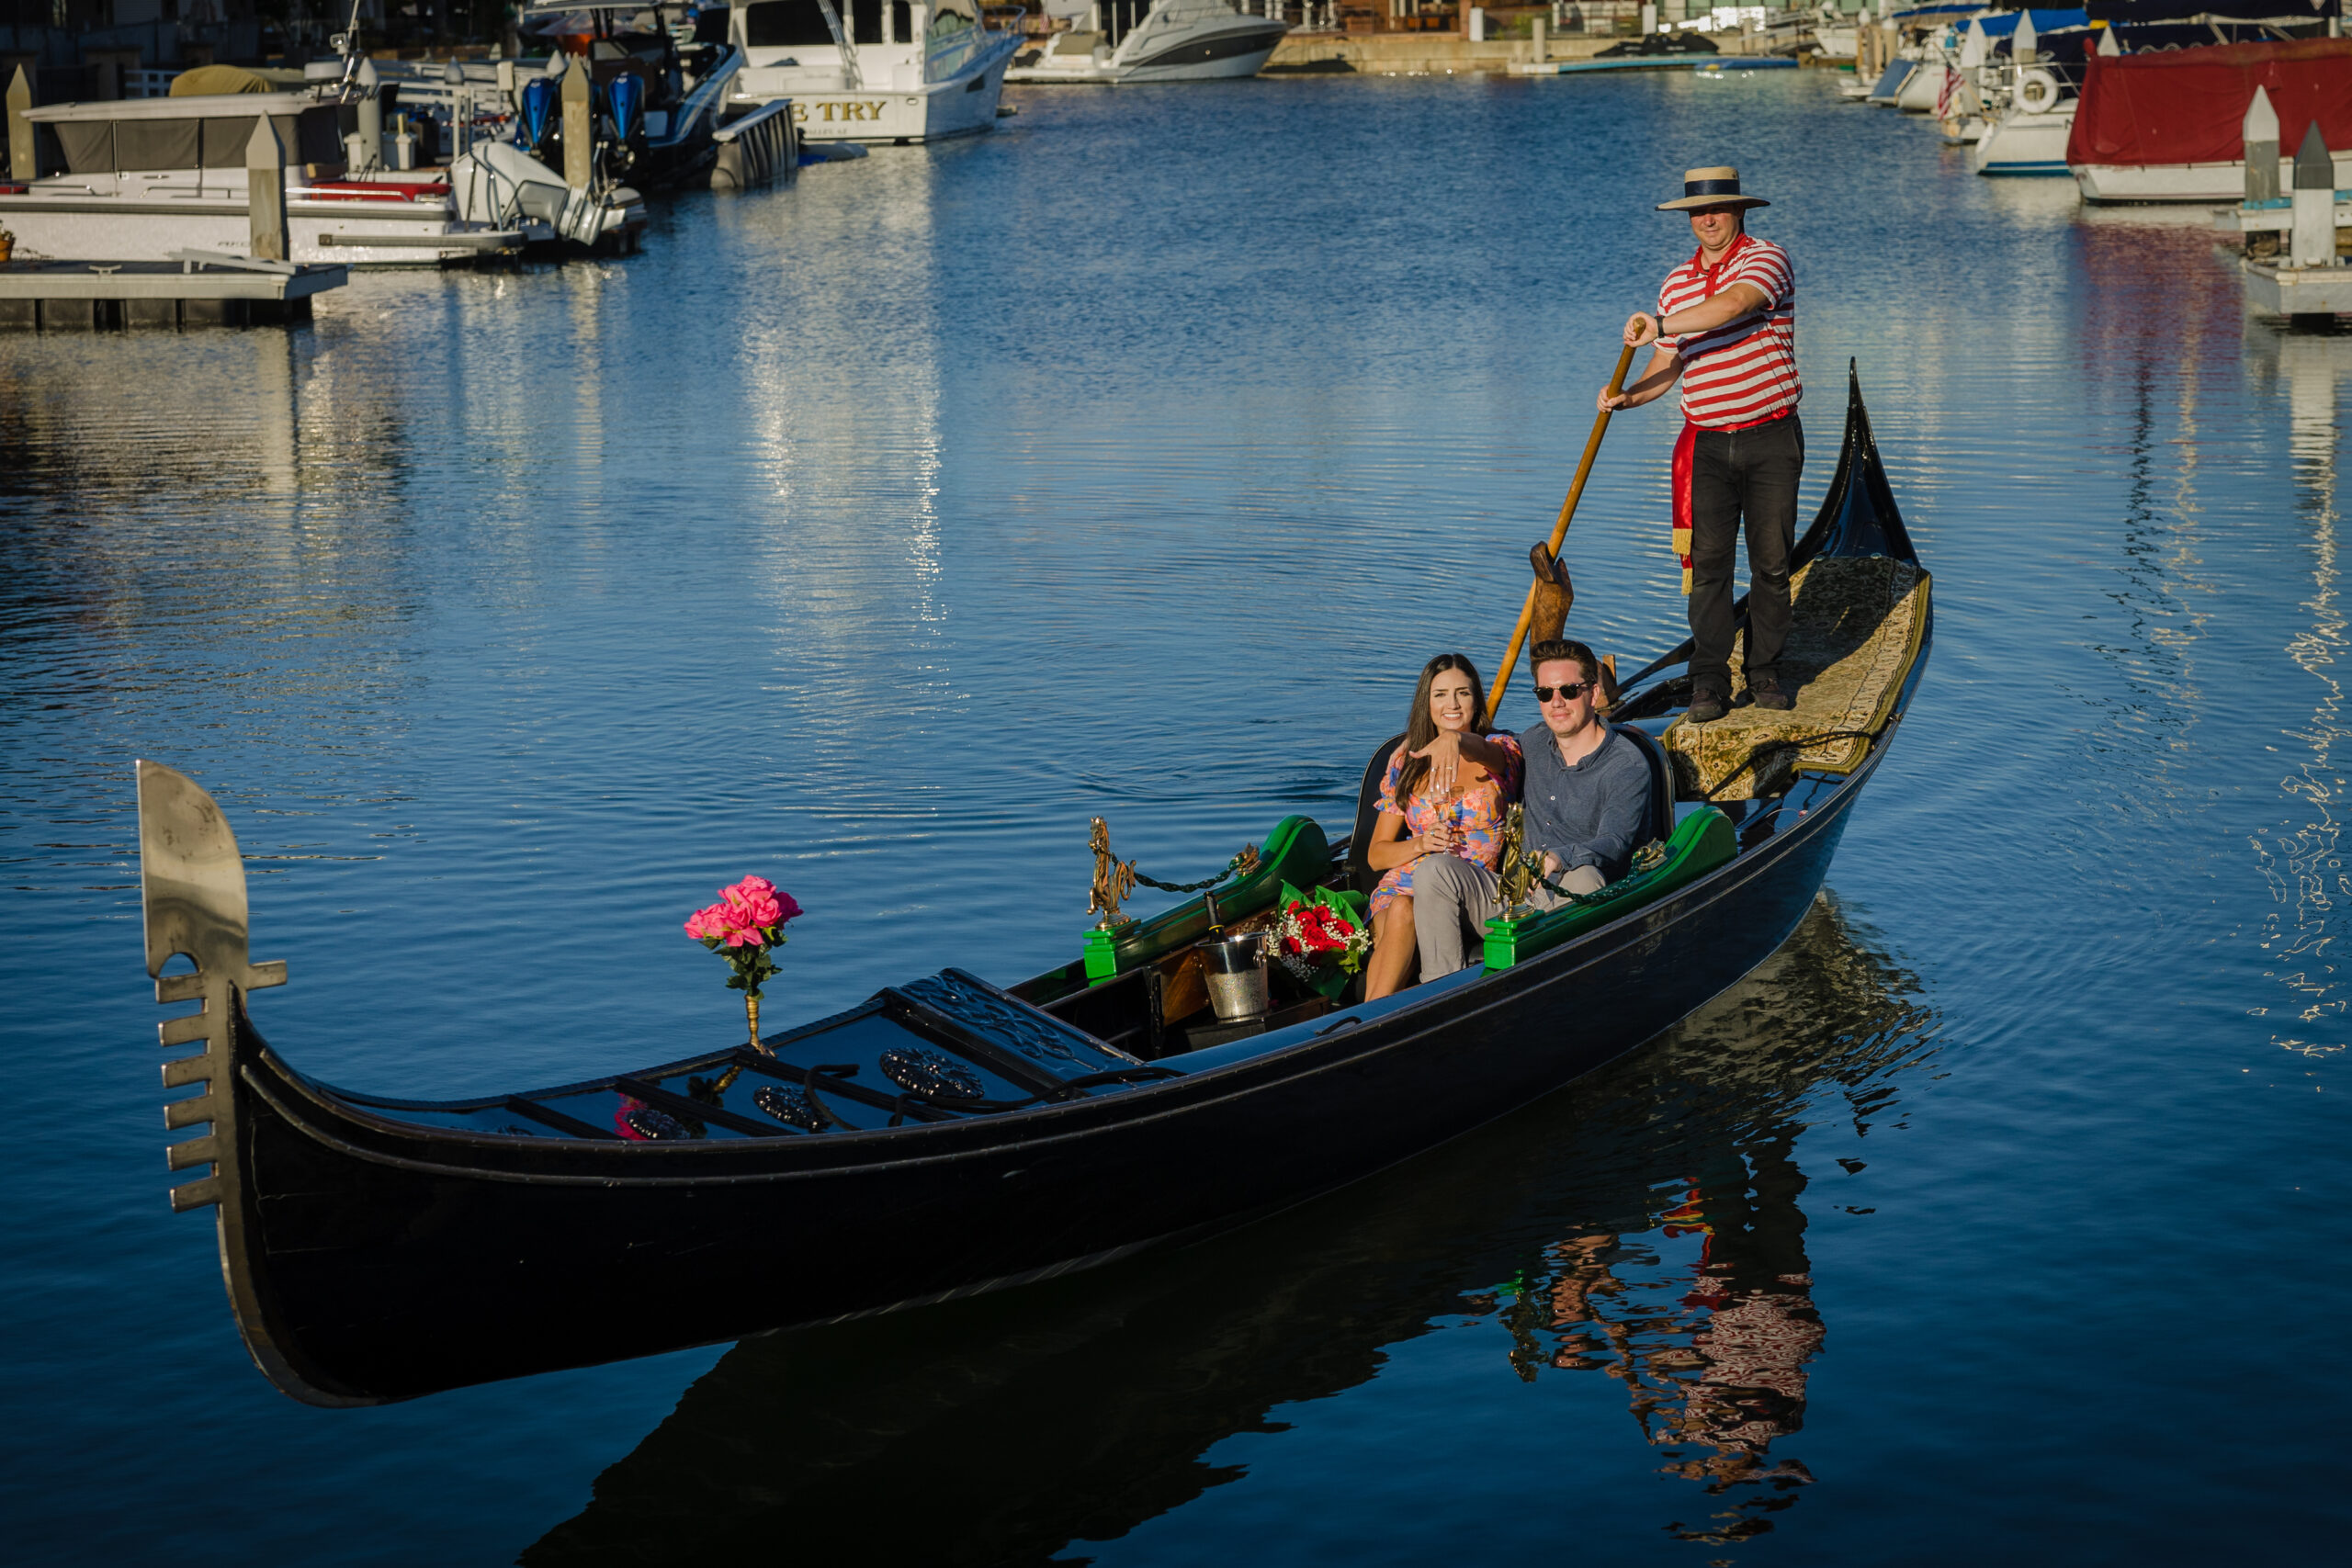 Greg used a gift certificate for a gondola ride to propose to his girlfriend at The Gondola Company in San Diego